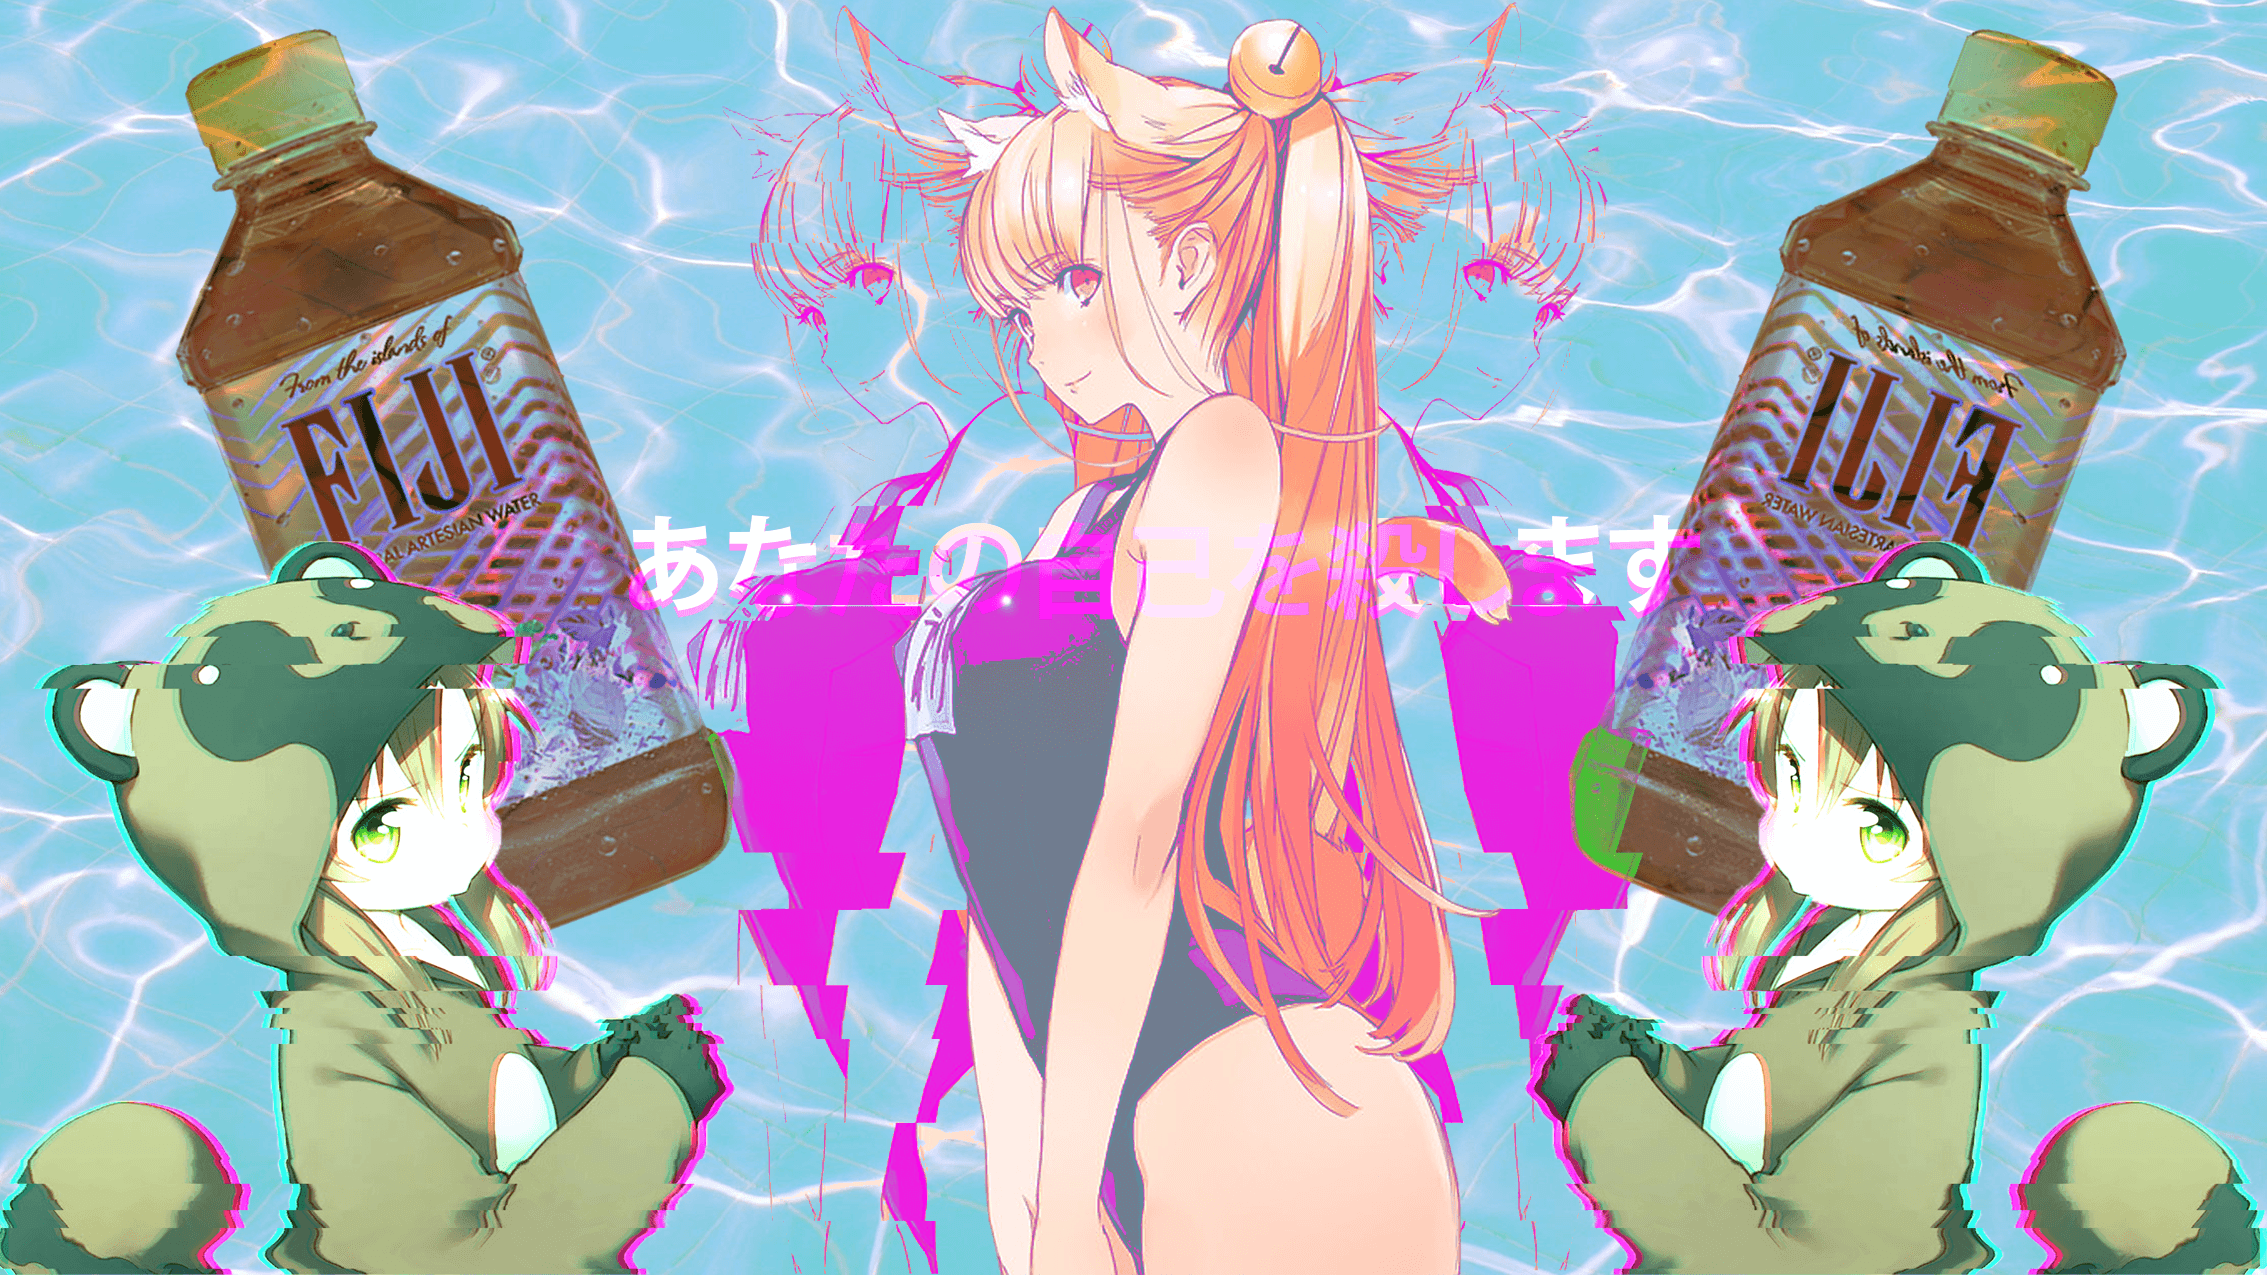 Some Anime Vaporwave Wallpapers.